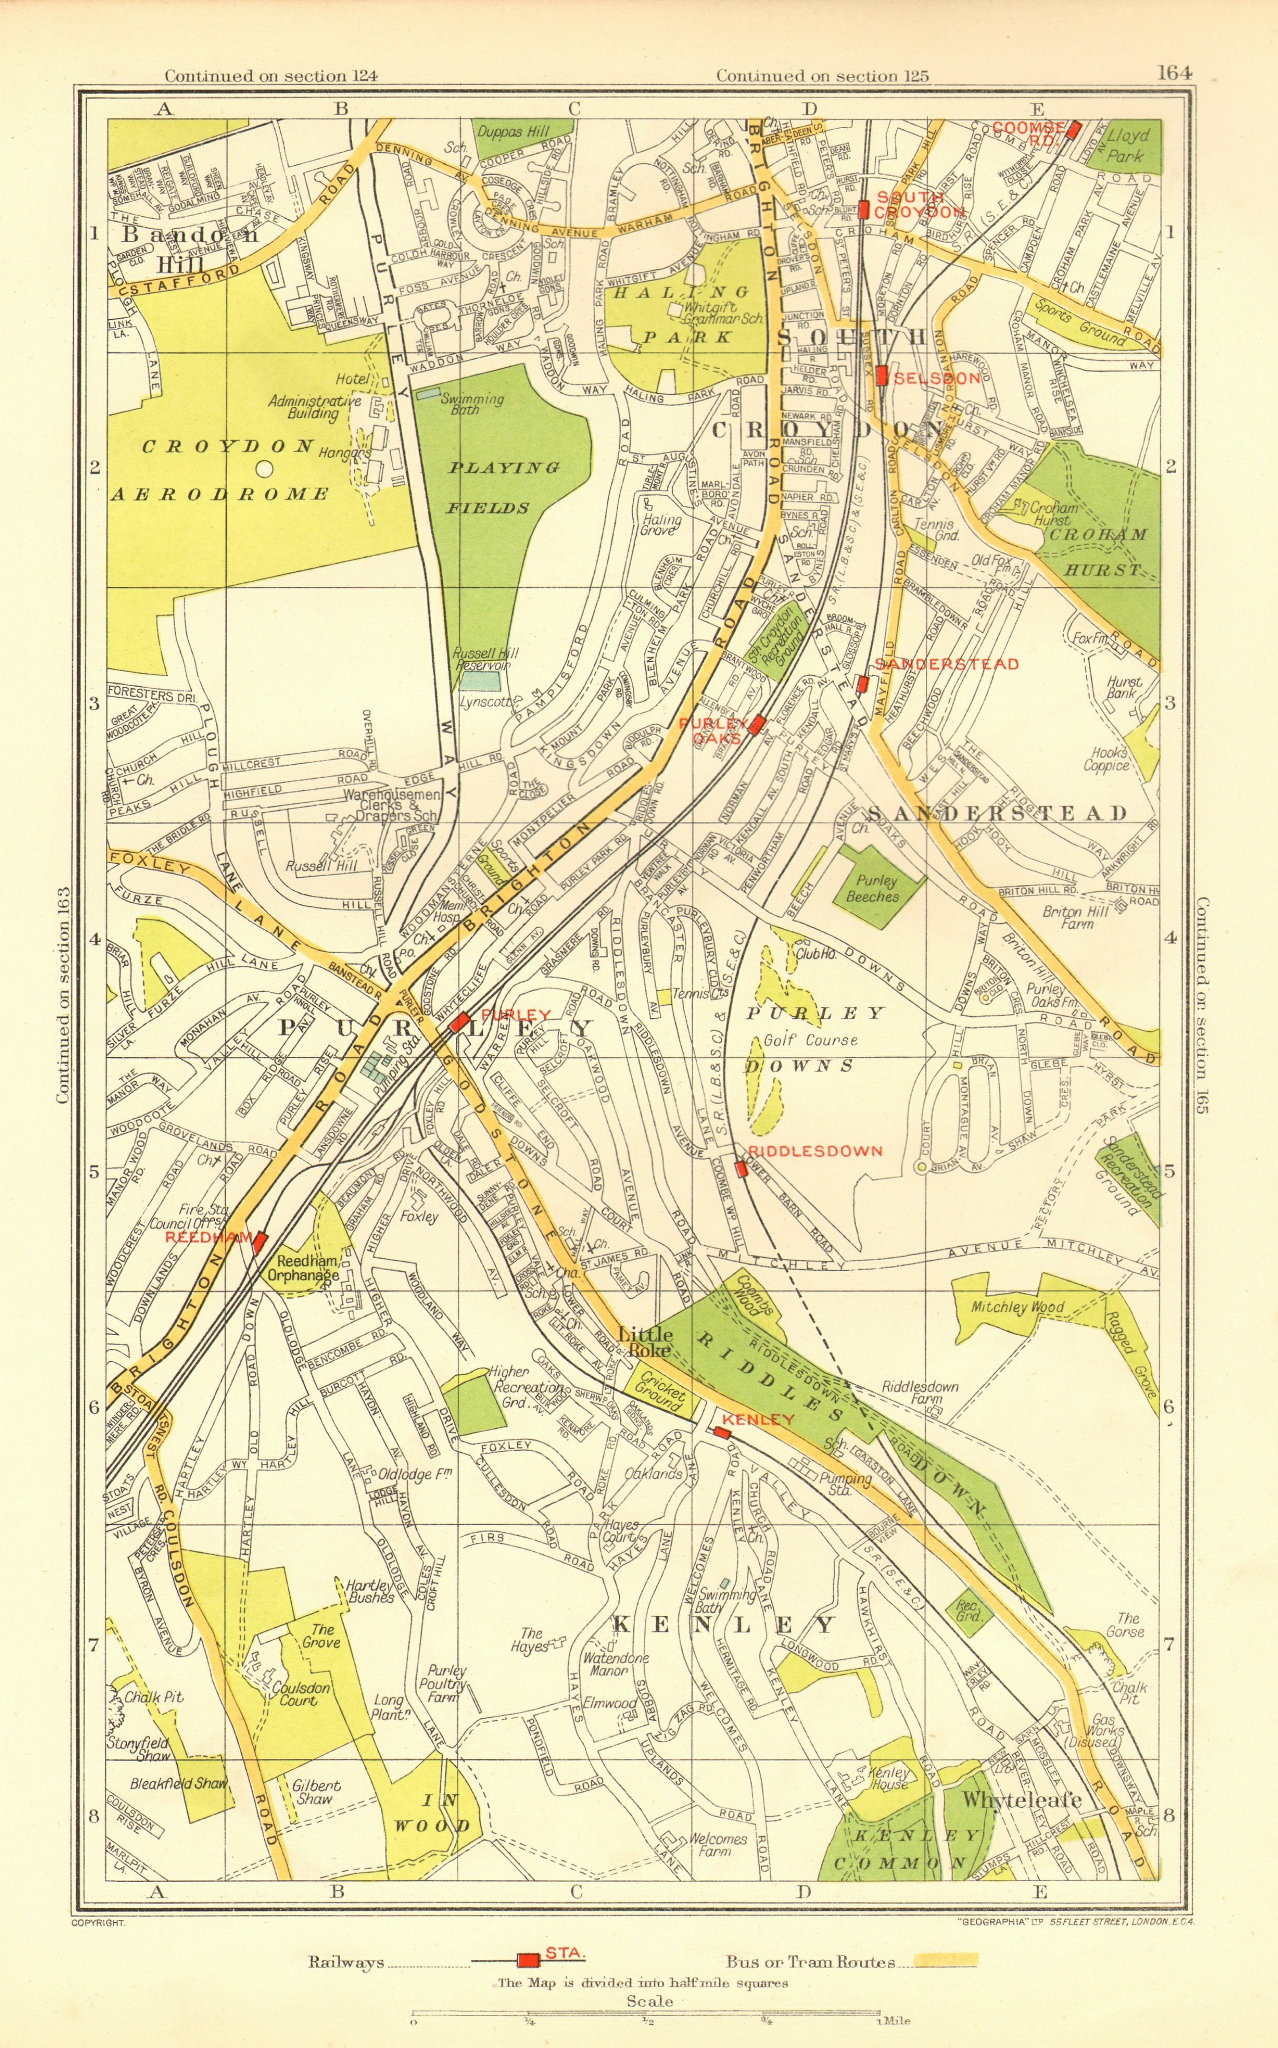 PURLEY COULSDON. South Croydon Kenley Sanderstead Roundshaw Woodcote 1937 map